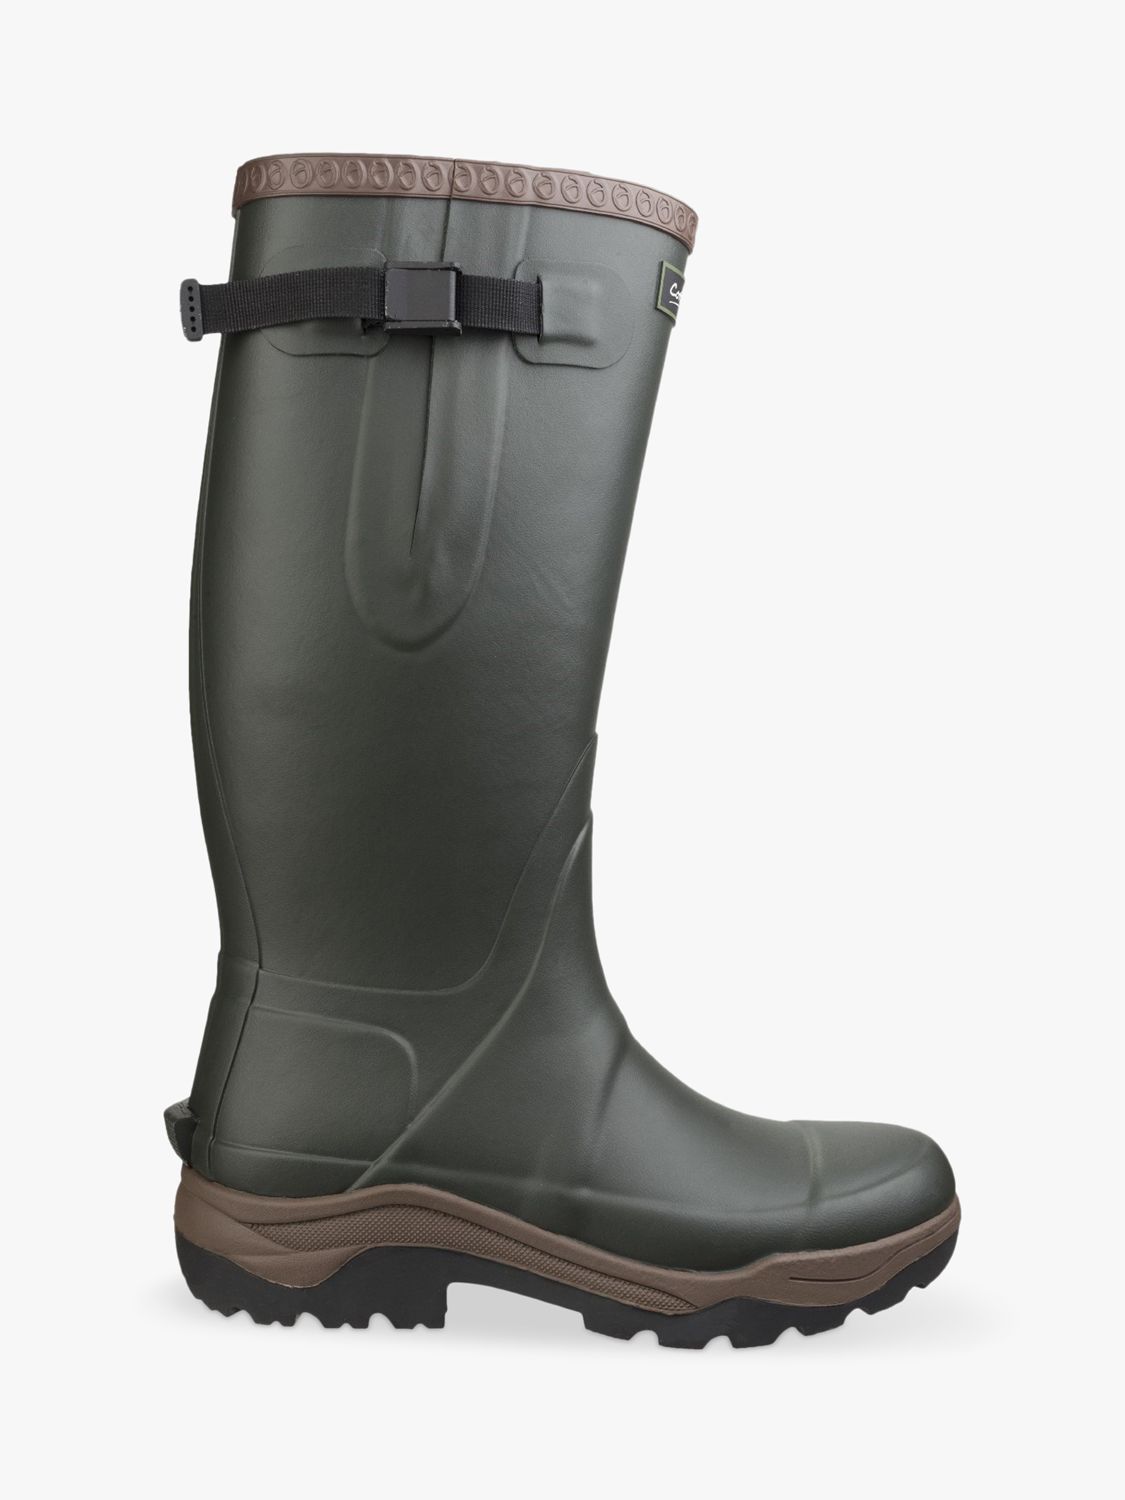 Cotswold Compass Waterproof Wellington Boots, Green at John Lewis ...